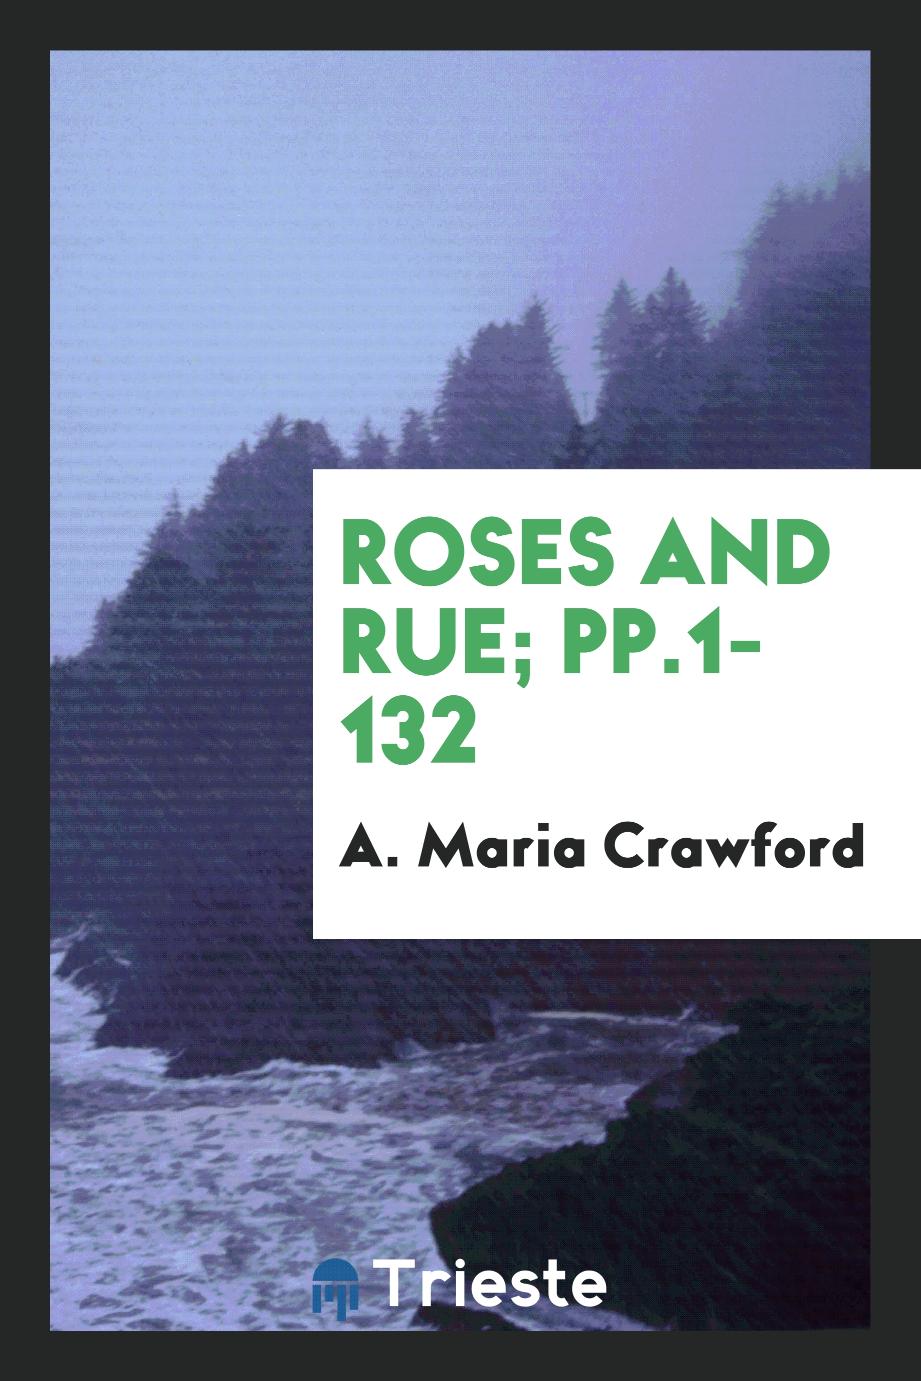 Roses and Rue; pp.1-132